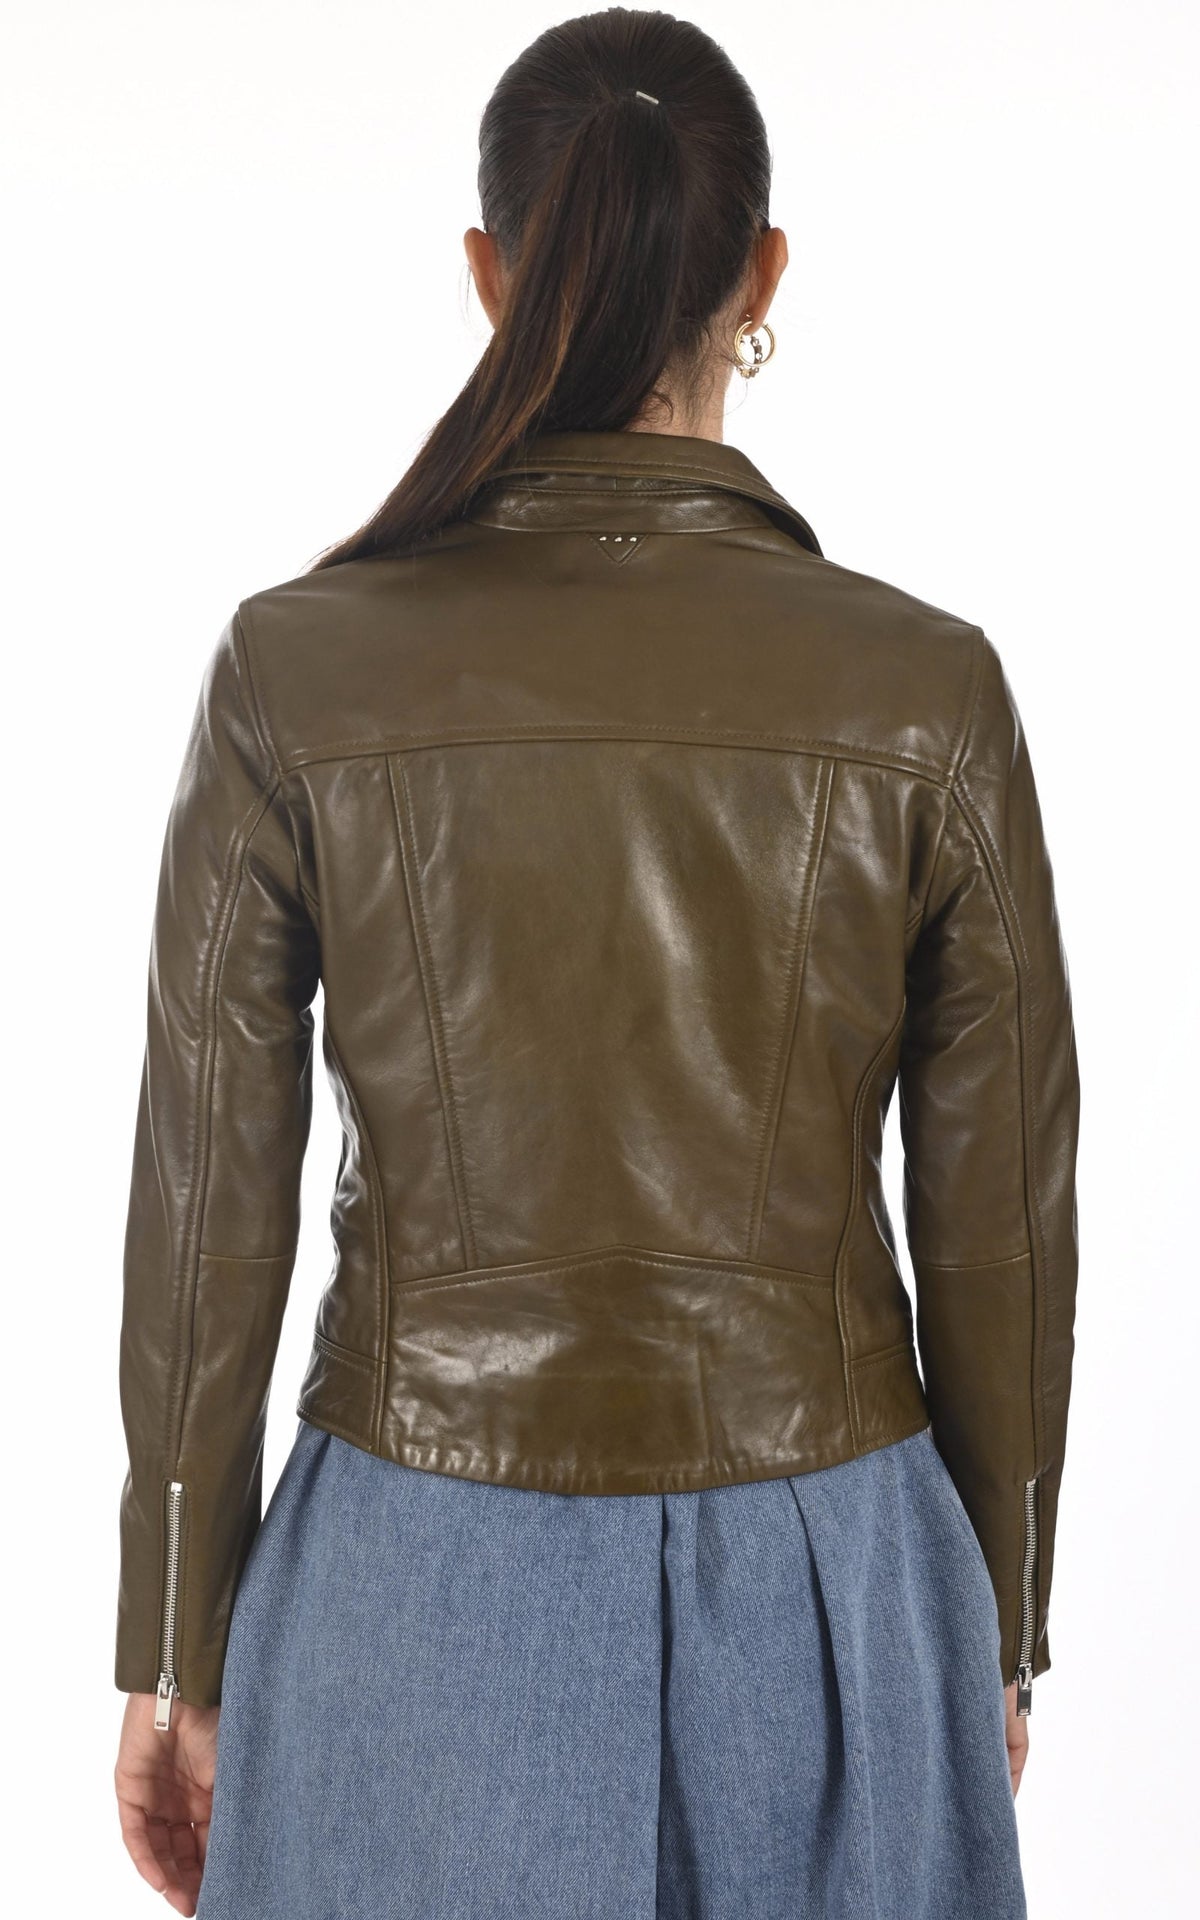 Stylish Olive Green Real Leather Jacket For Women – LJ